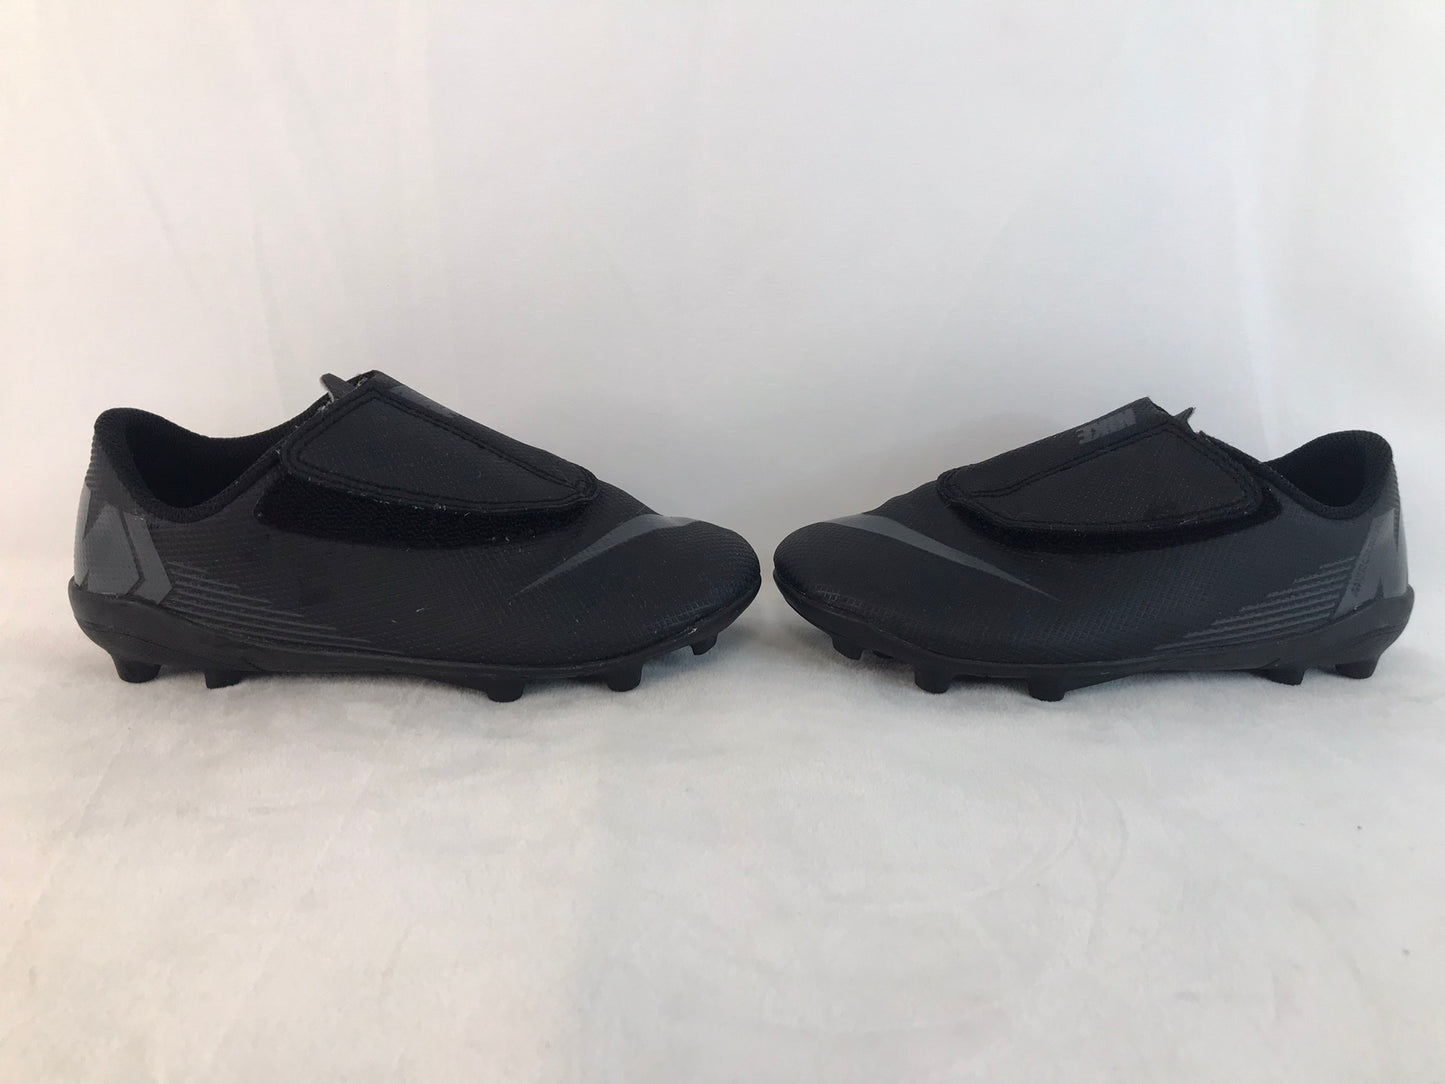 Soccer Shoes Cleats Child Size 13 Nike Murcurial Black Excellent